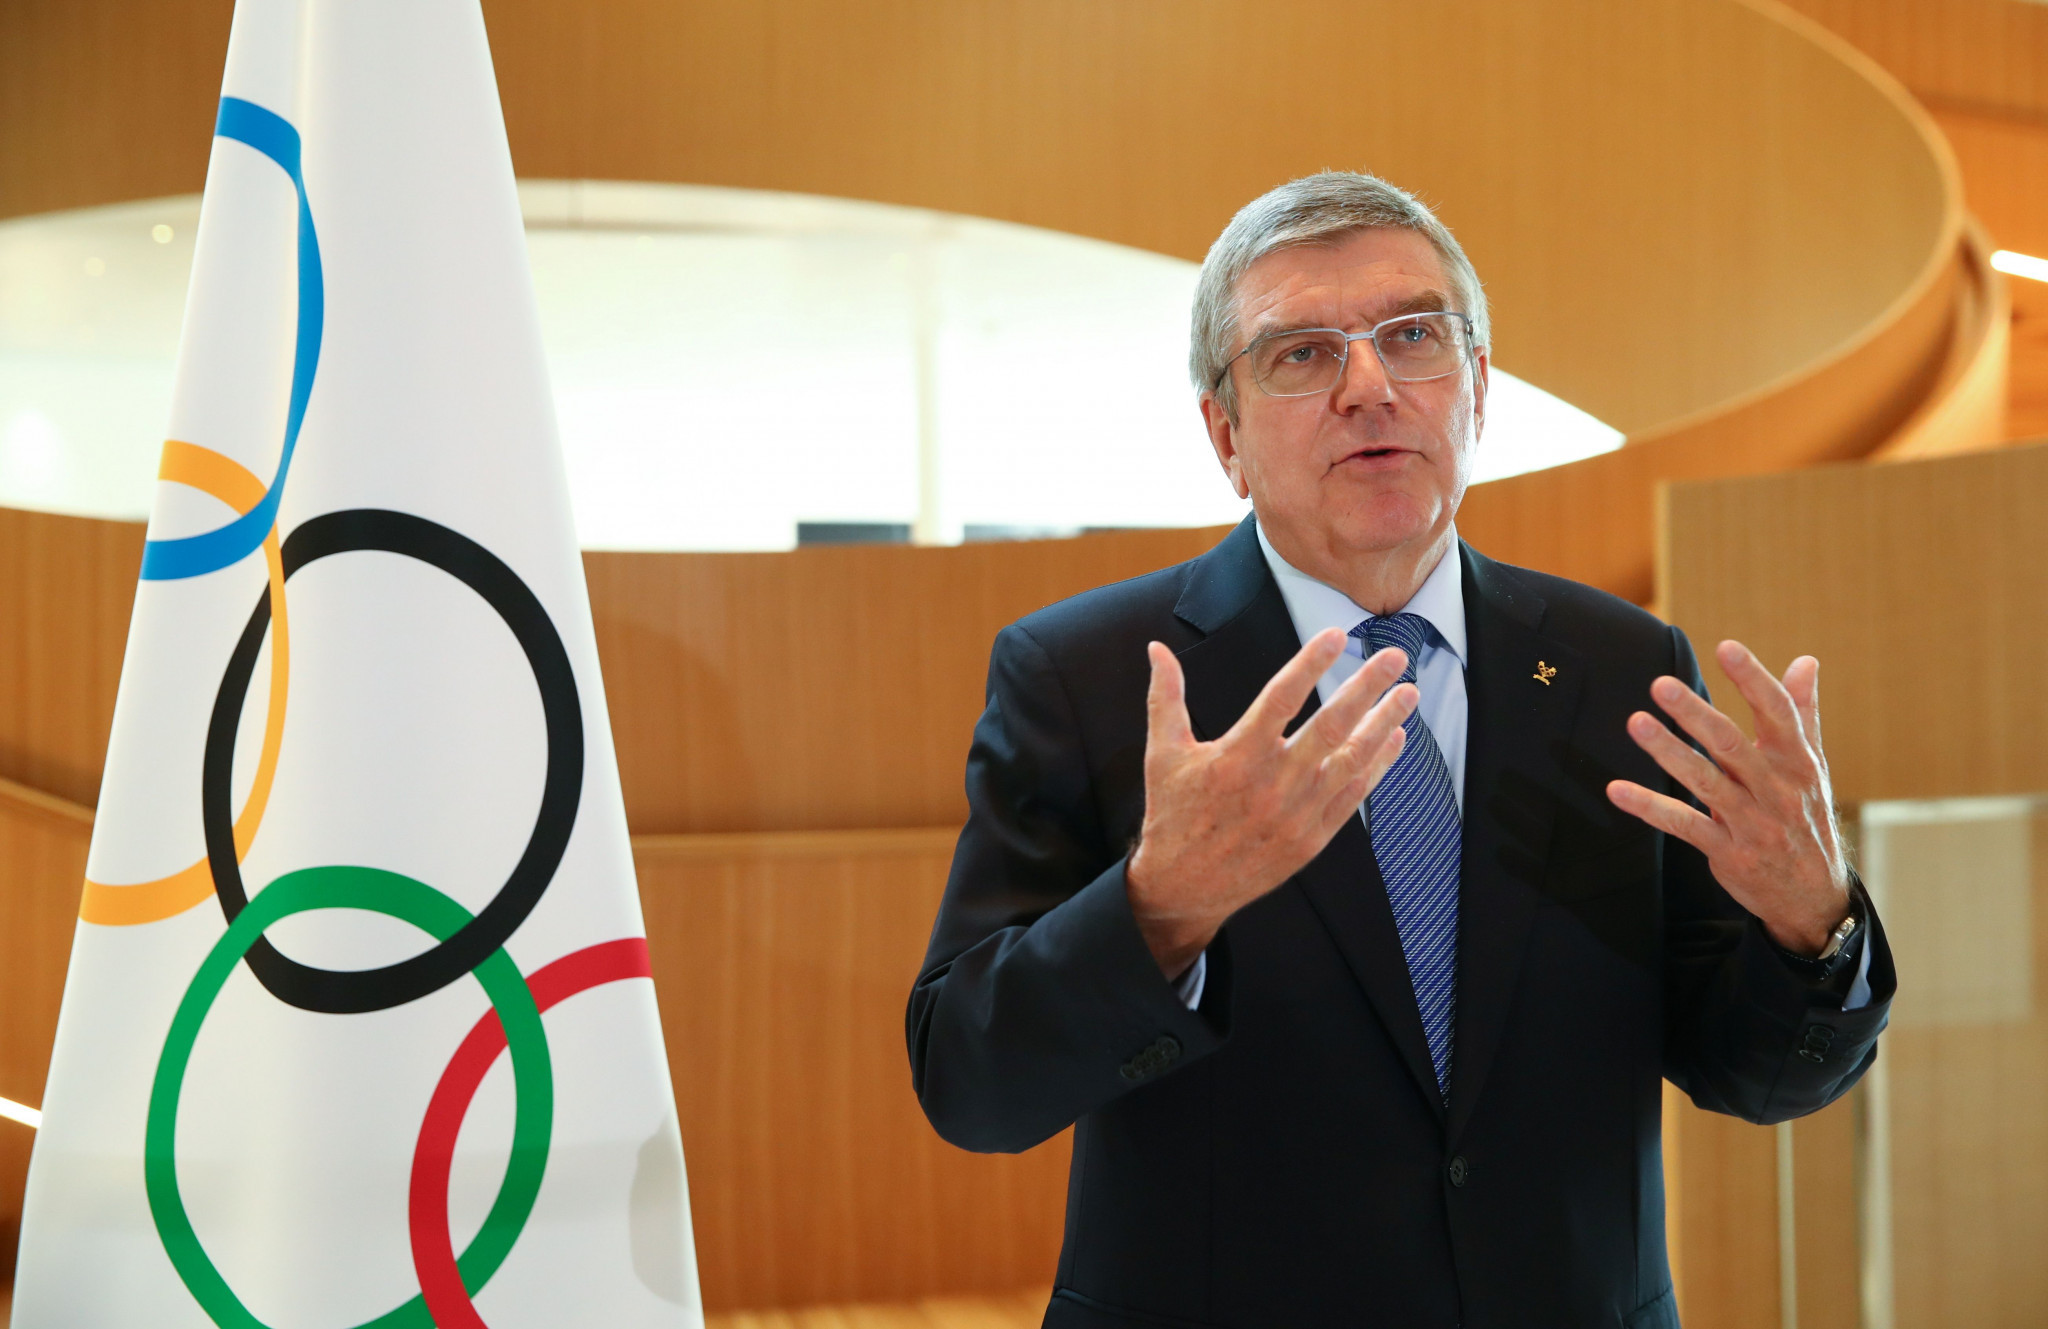 IOC President Thomas Bach was among those to welcome the new Prime Minister ©Getty Images